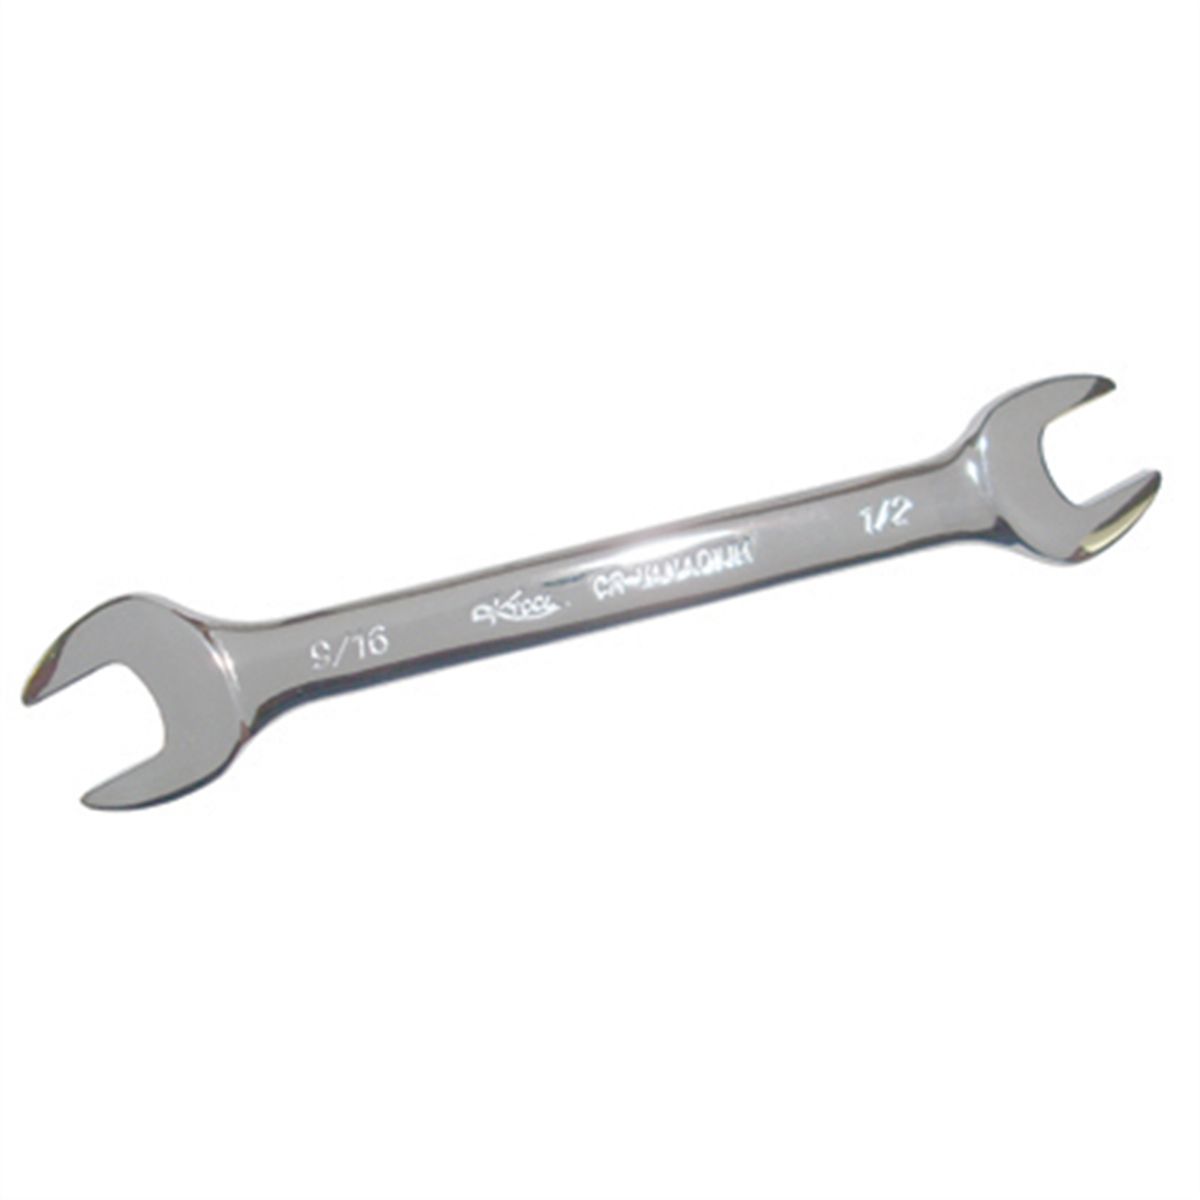 1/2" x 9/16" Open end wrench